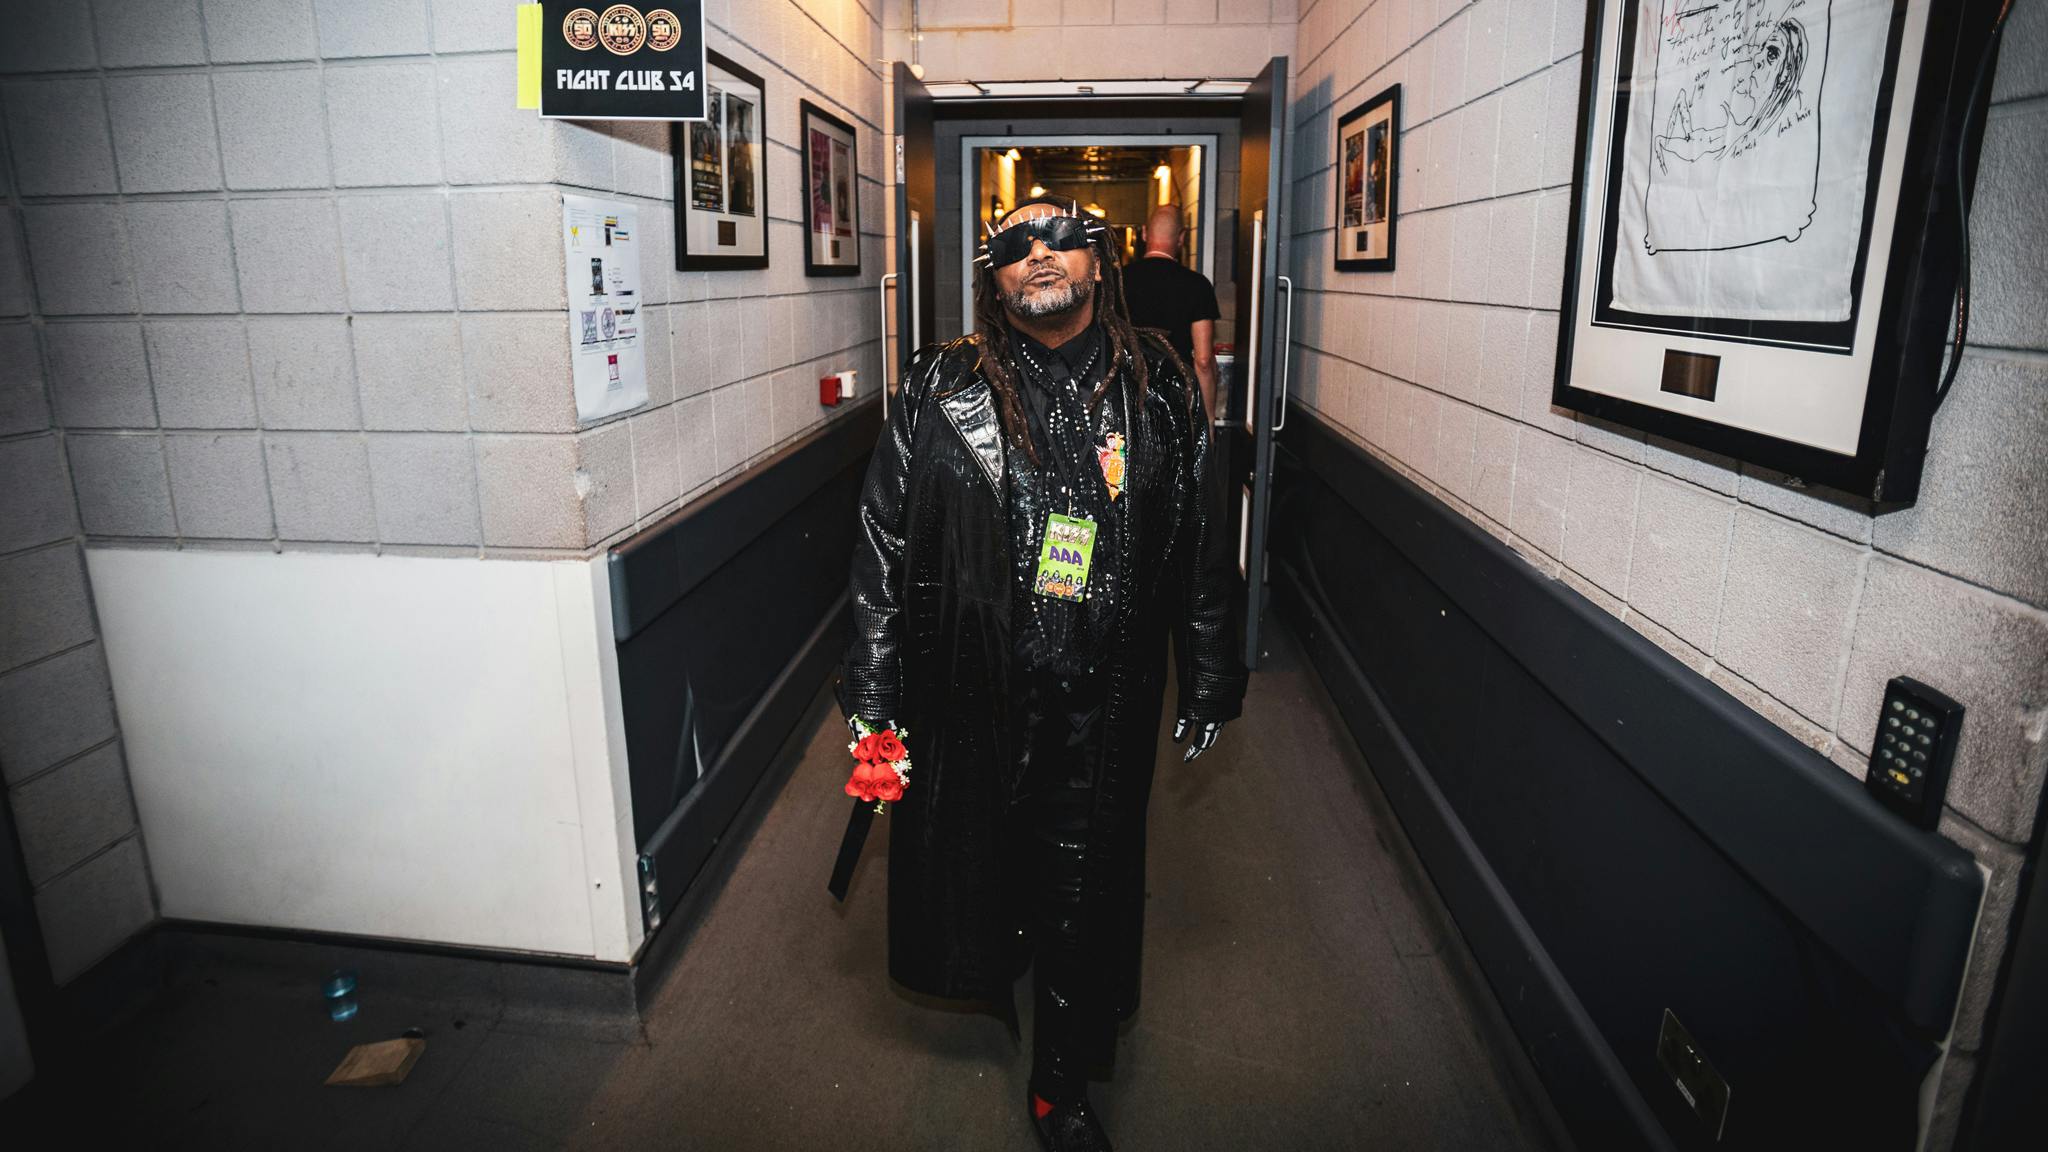 Air-raid sirens, fitness goals and Captain Birdseye: Life on the road with Skindred